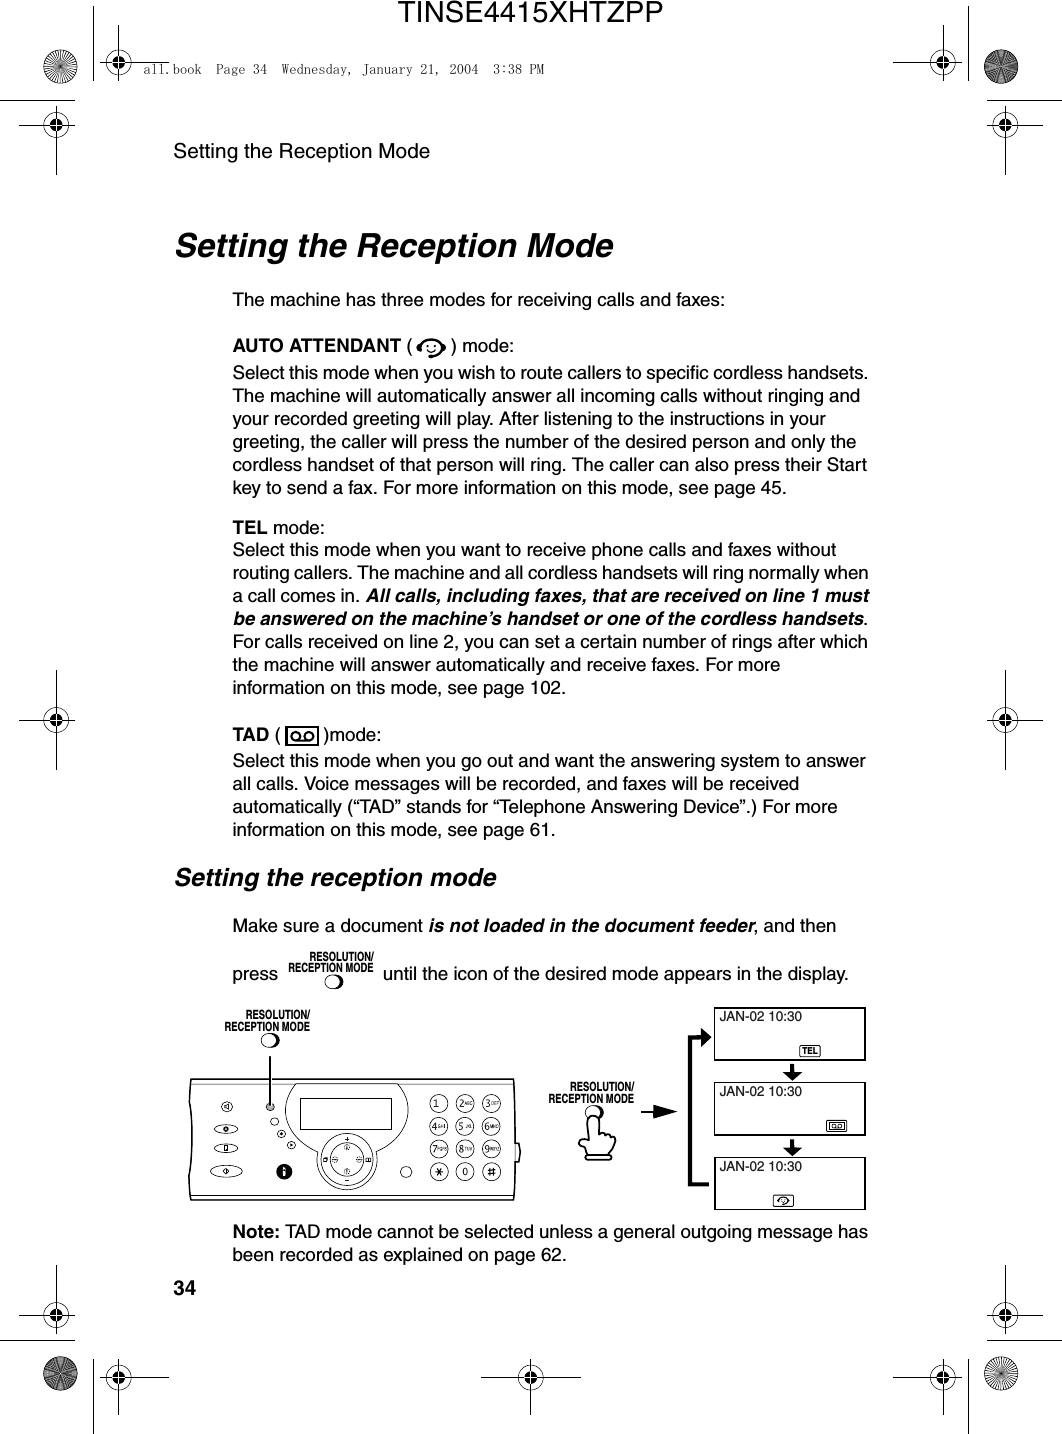 Setting the Reception Mode34Setting the Reception ModeThe machine has three modes for receiving calls and faxes:AUTO ATTENDANT ( ) mode:Select this mode when you wish to route callers to specific cordless handsets. The machine will automatically answer all incoming calls without ringing and your recorded greeting will play. After listening to the instructions in your greeting, the caller will press the number of the desired person and only the cordless handset of that person will ring. The caller can also press their Start key to send a fax. For more information on this mode, see page 45.TEL mode:Select this mode when you want to receive phone calls and faxes without routing callers. The machine and all cordless handsets will ring normally when a call comes in. All calls, including faxes, that are received on line 1 must be answered on the machine’s handset or one of the cordless handsets. For calls received on line 2, you can set a certain number of rings after which the machine will answer automatically and receive faxes. For more information on this mode, see page 102.TAD ( )mode:Select this mode when you go out and want the answering system to answer all calls. Voice messages will be recorded, and faxes will be received automatically (“TAD” stands for “Telephone Answering Device”.) For more information on this mode, see page 61.Setting the reception modeMake sure a document is not loaded in the document feeder, and then press   until the icon of the desired mode appears in the display.RESOLUTION/RECEPTION MODETELJAN-02 10:30JAN-02 10:30JAN-02 10:30RESOLUTION/RECEPTION MODERESOLUTION/RECEPTION MODENote: TAD mode cannot be selected unless a general outgoing message has been recorded as explained on page 62.all.book  Page 34  Wednesday, January 21, 2004  3:38 PMTINSE4415XHTZPP